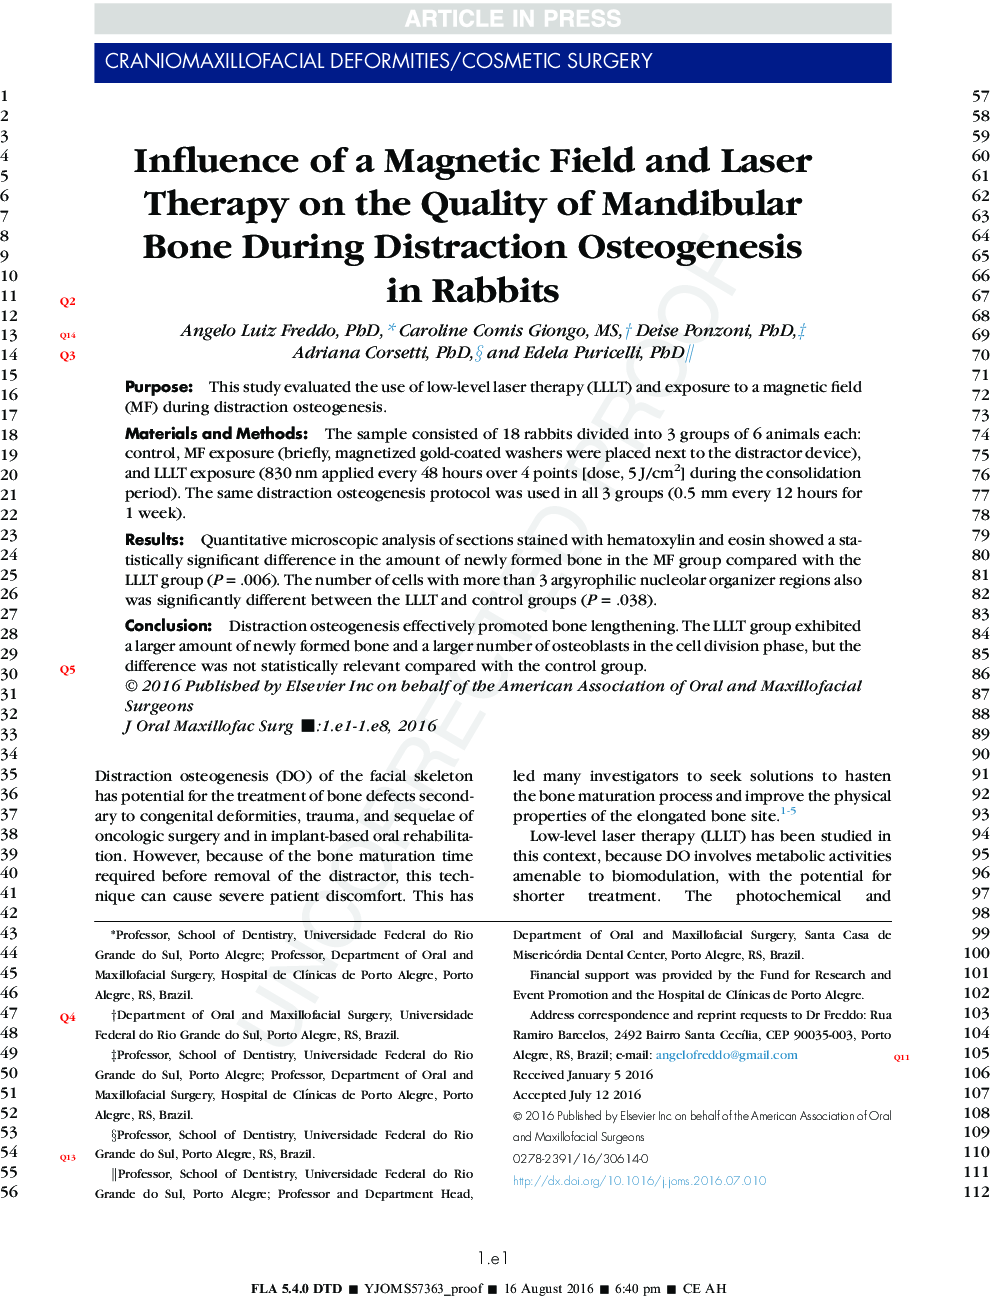 Influence of a Magnetic Field and Laser Therapy on the Quality of Mandibular Bone During Distraction Osteogenesis in Rabbits